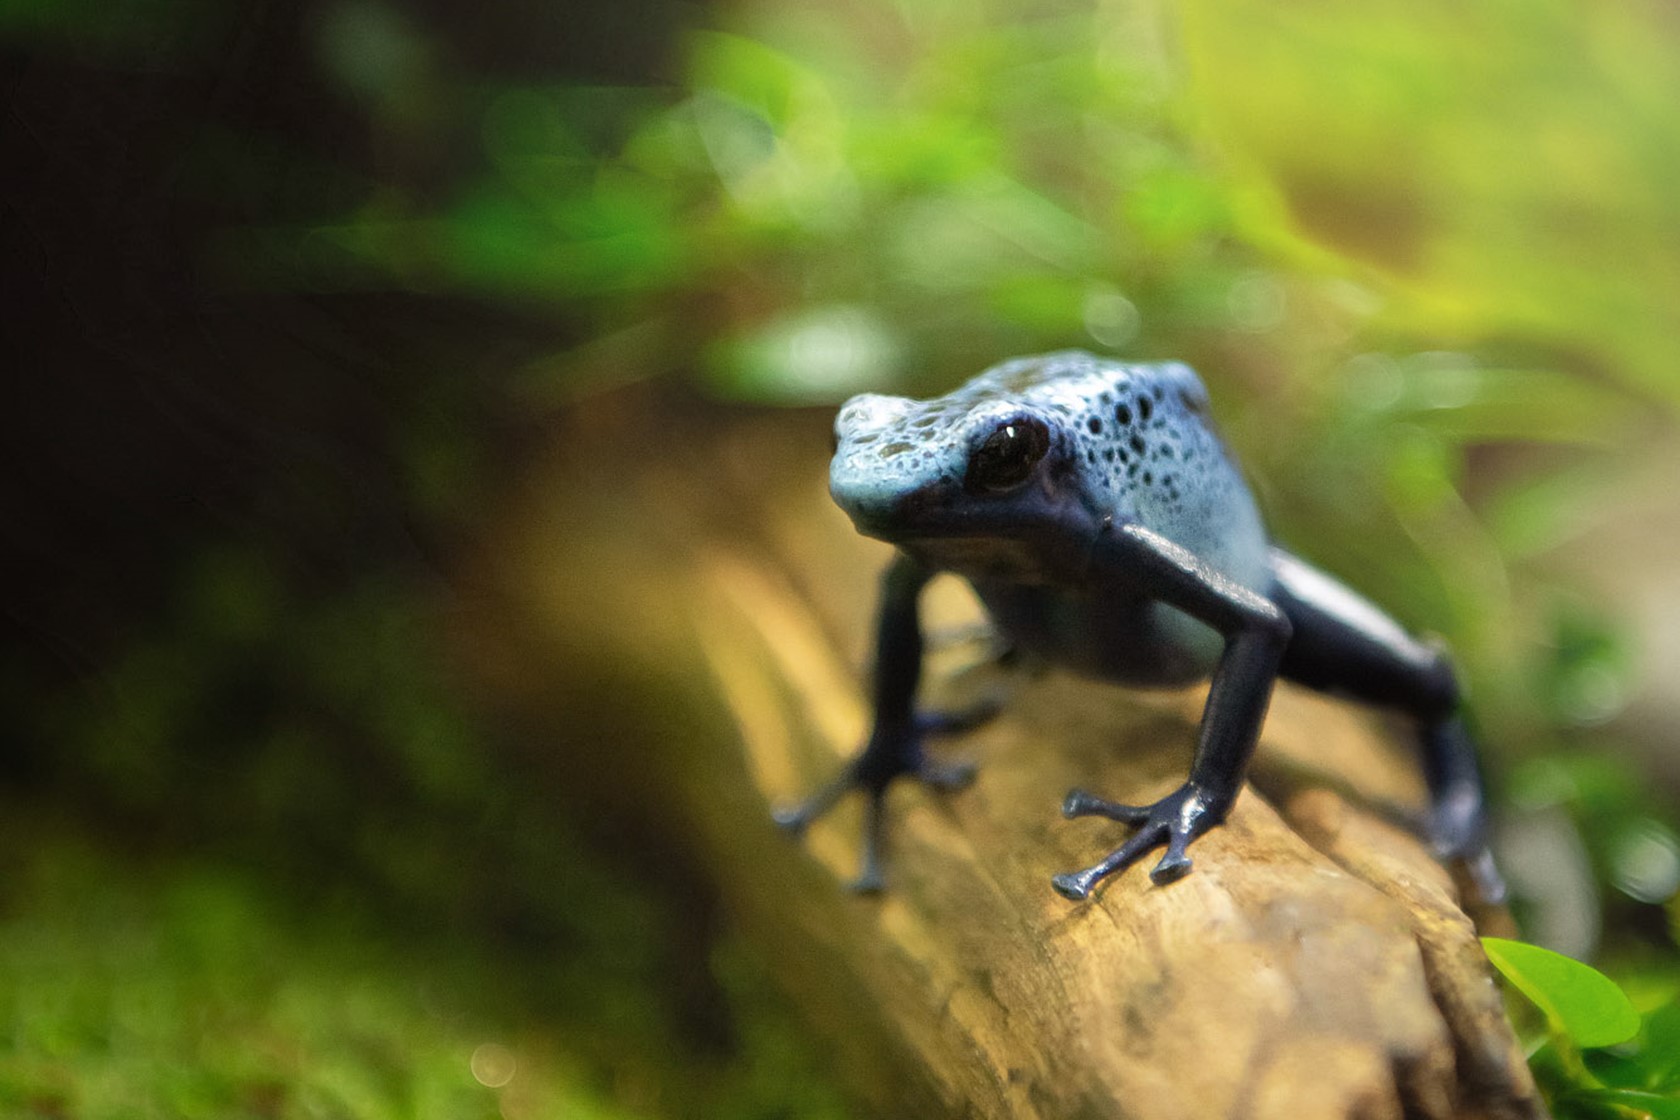 Blue Poison Dart Frog perched on a twig at Jersey Zoo